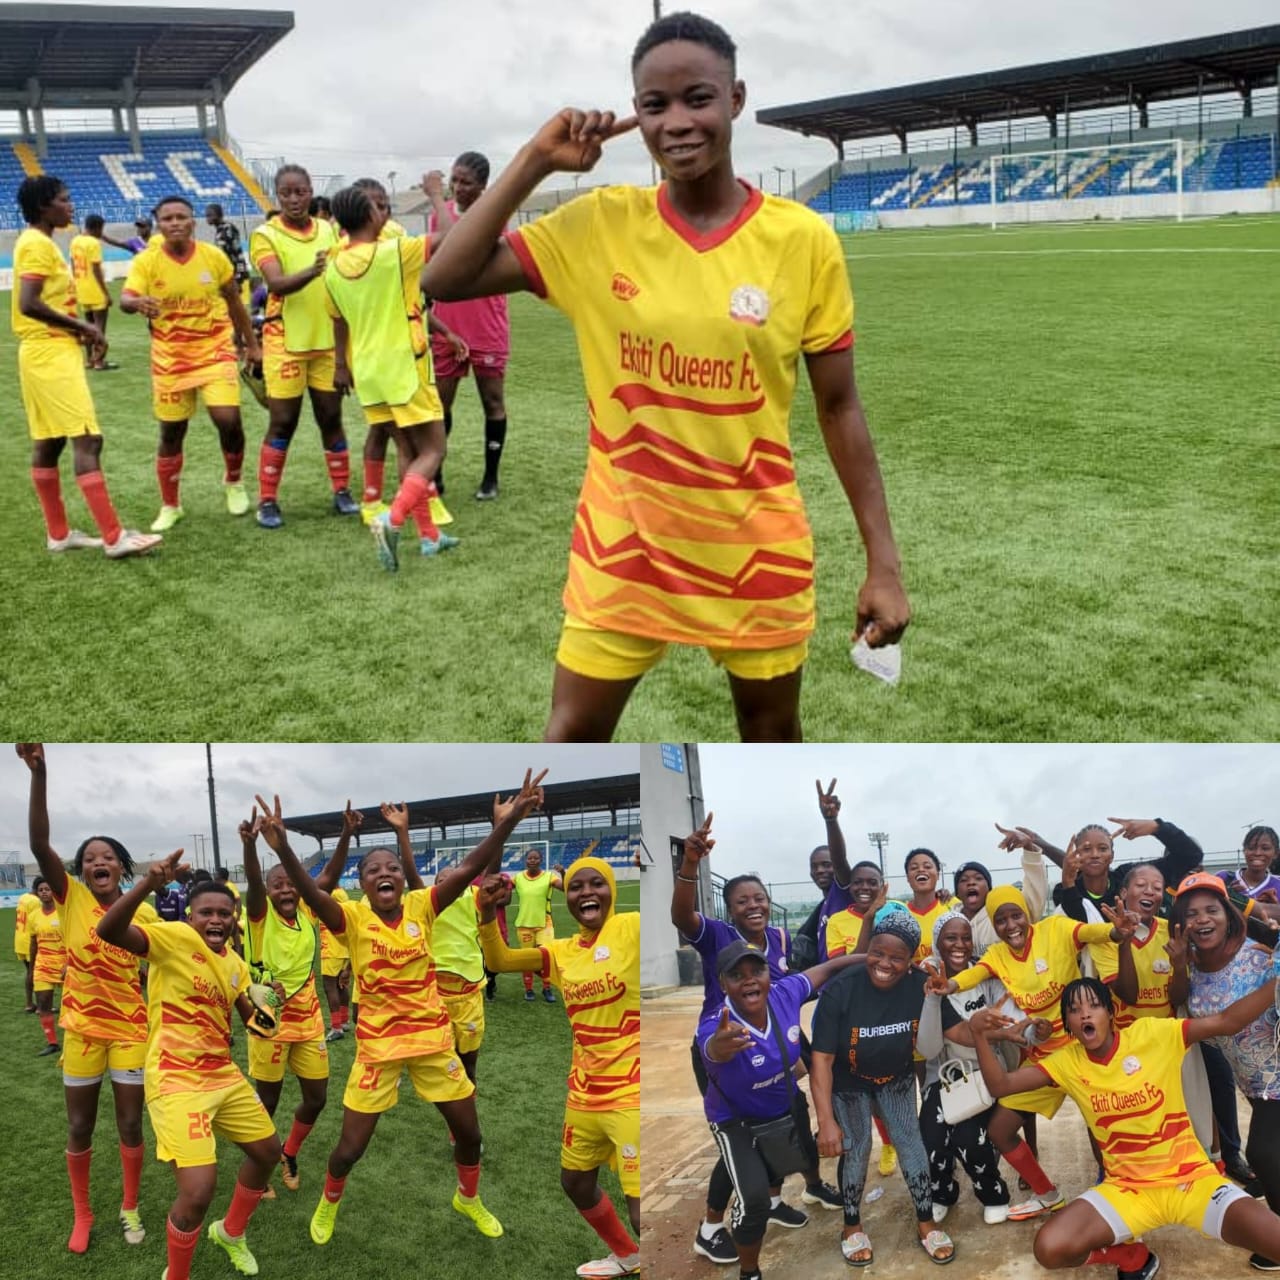 NWFL Championship Qualifiers: Ekiti Queens Secure Maximum Points From 2 Matches, Top Group A